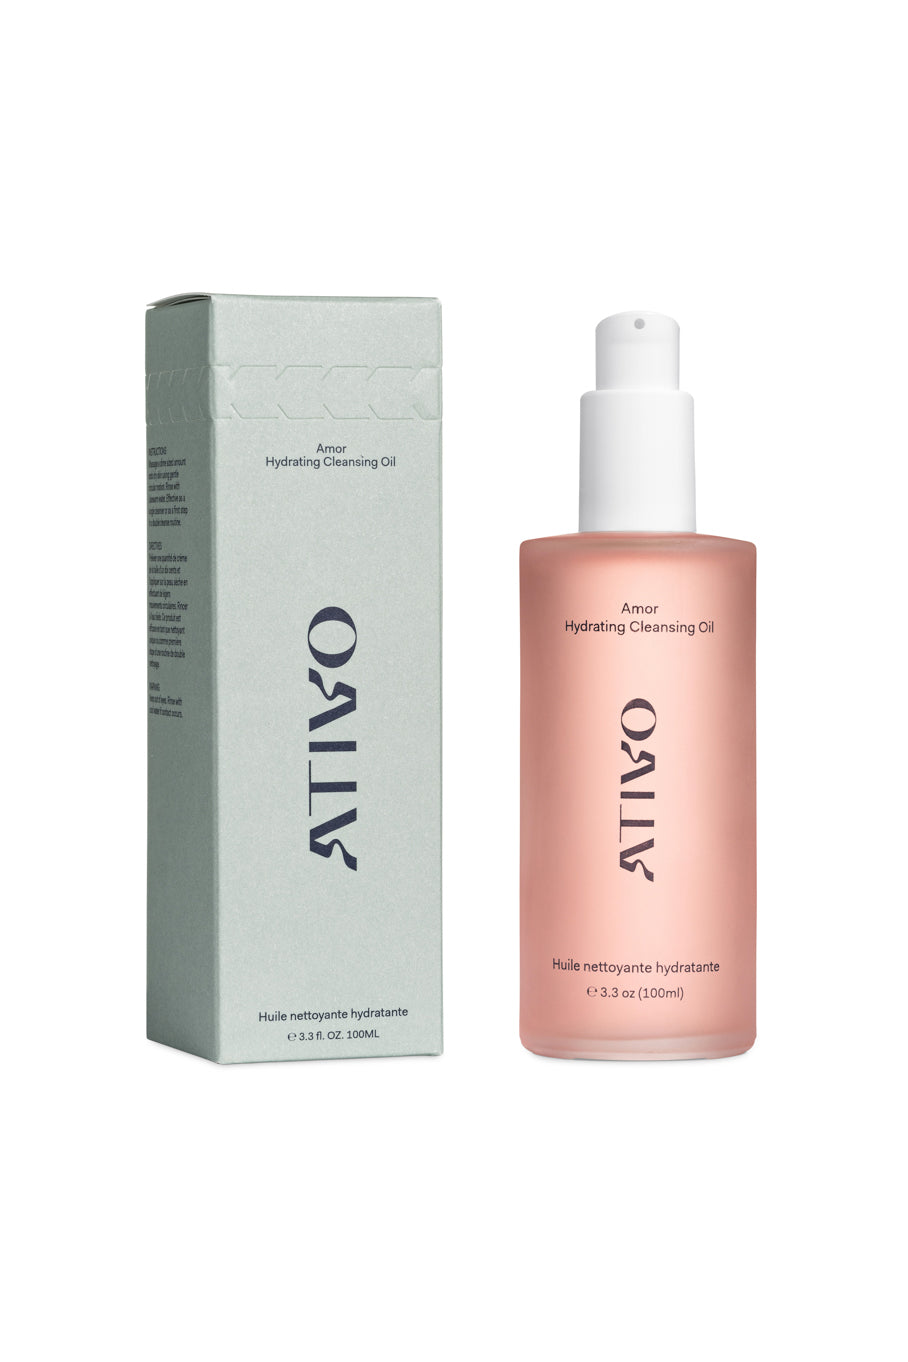 Ativo-Amor-Hydrating-Cleansing-Oil